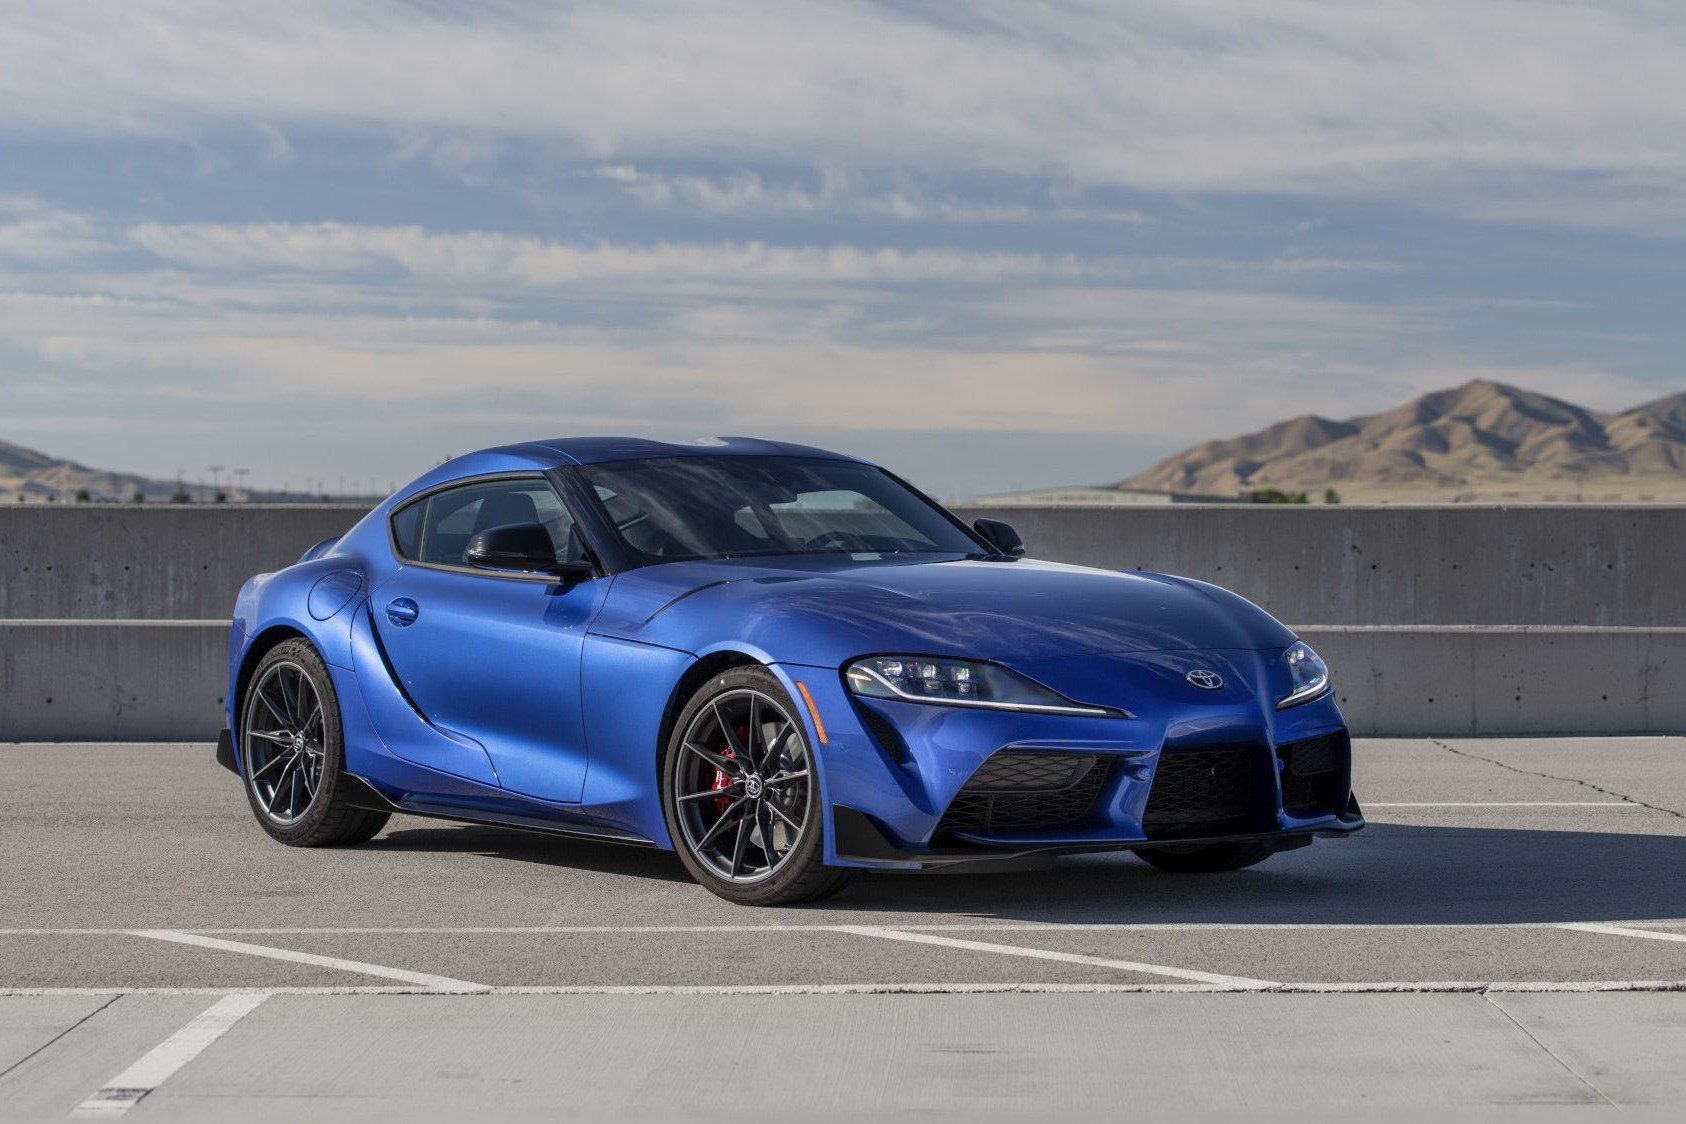 Front-angled view of a blue Toyota GR Supra